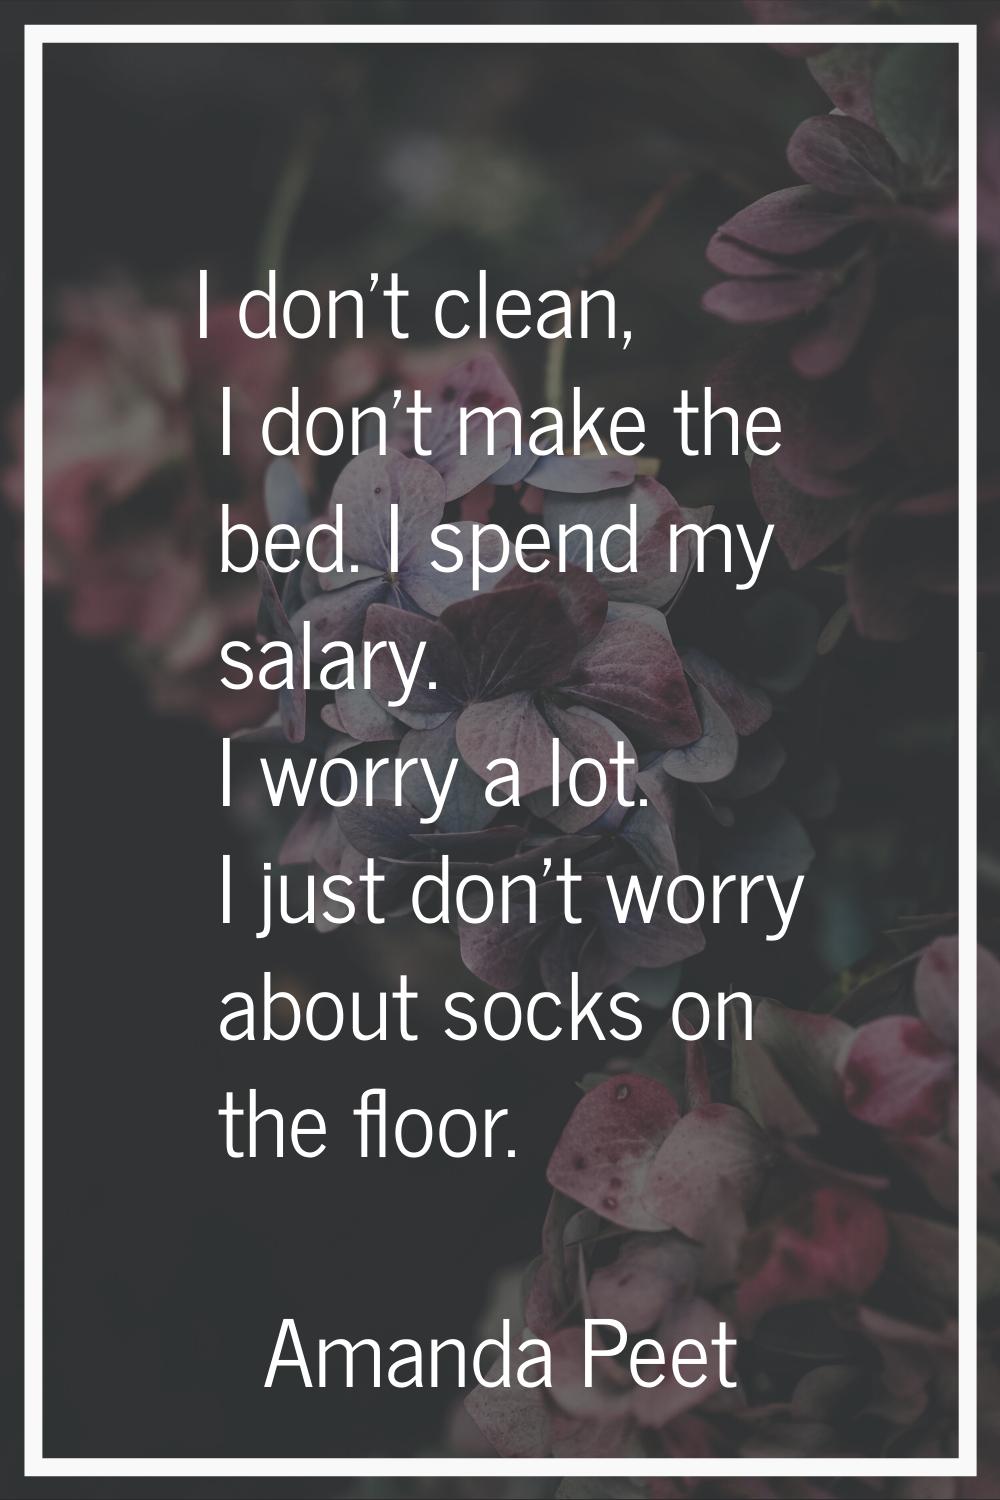 I don't clean, I don't make the bed. I spend my salary. I worry a lot. I just don't worry about soc